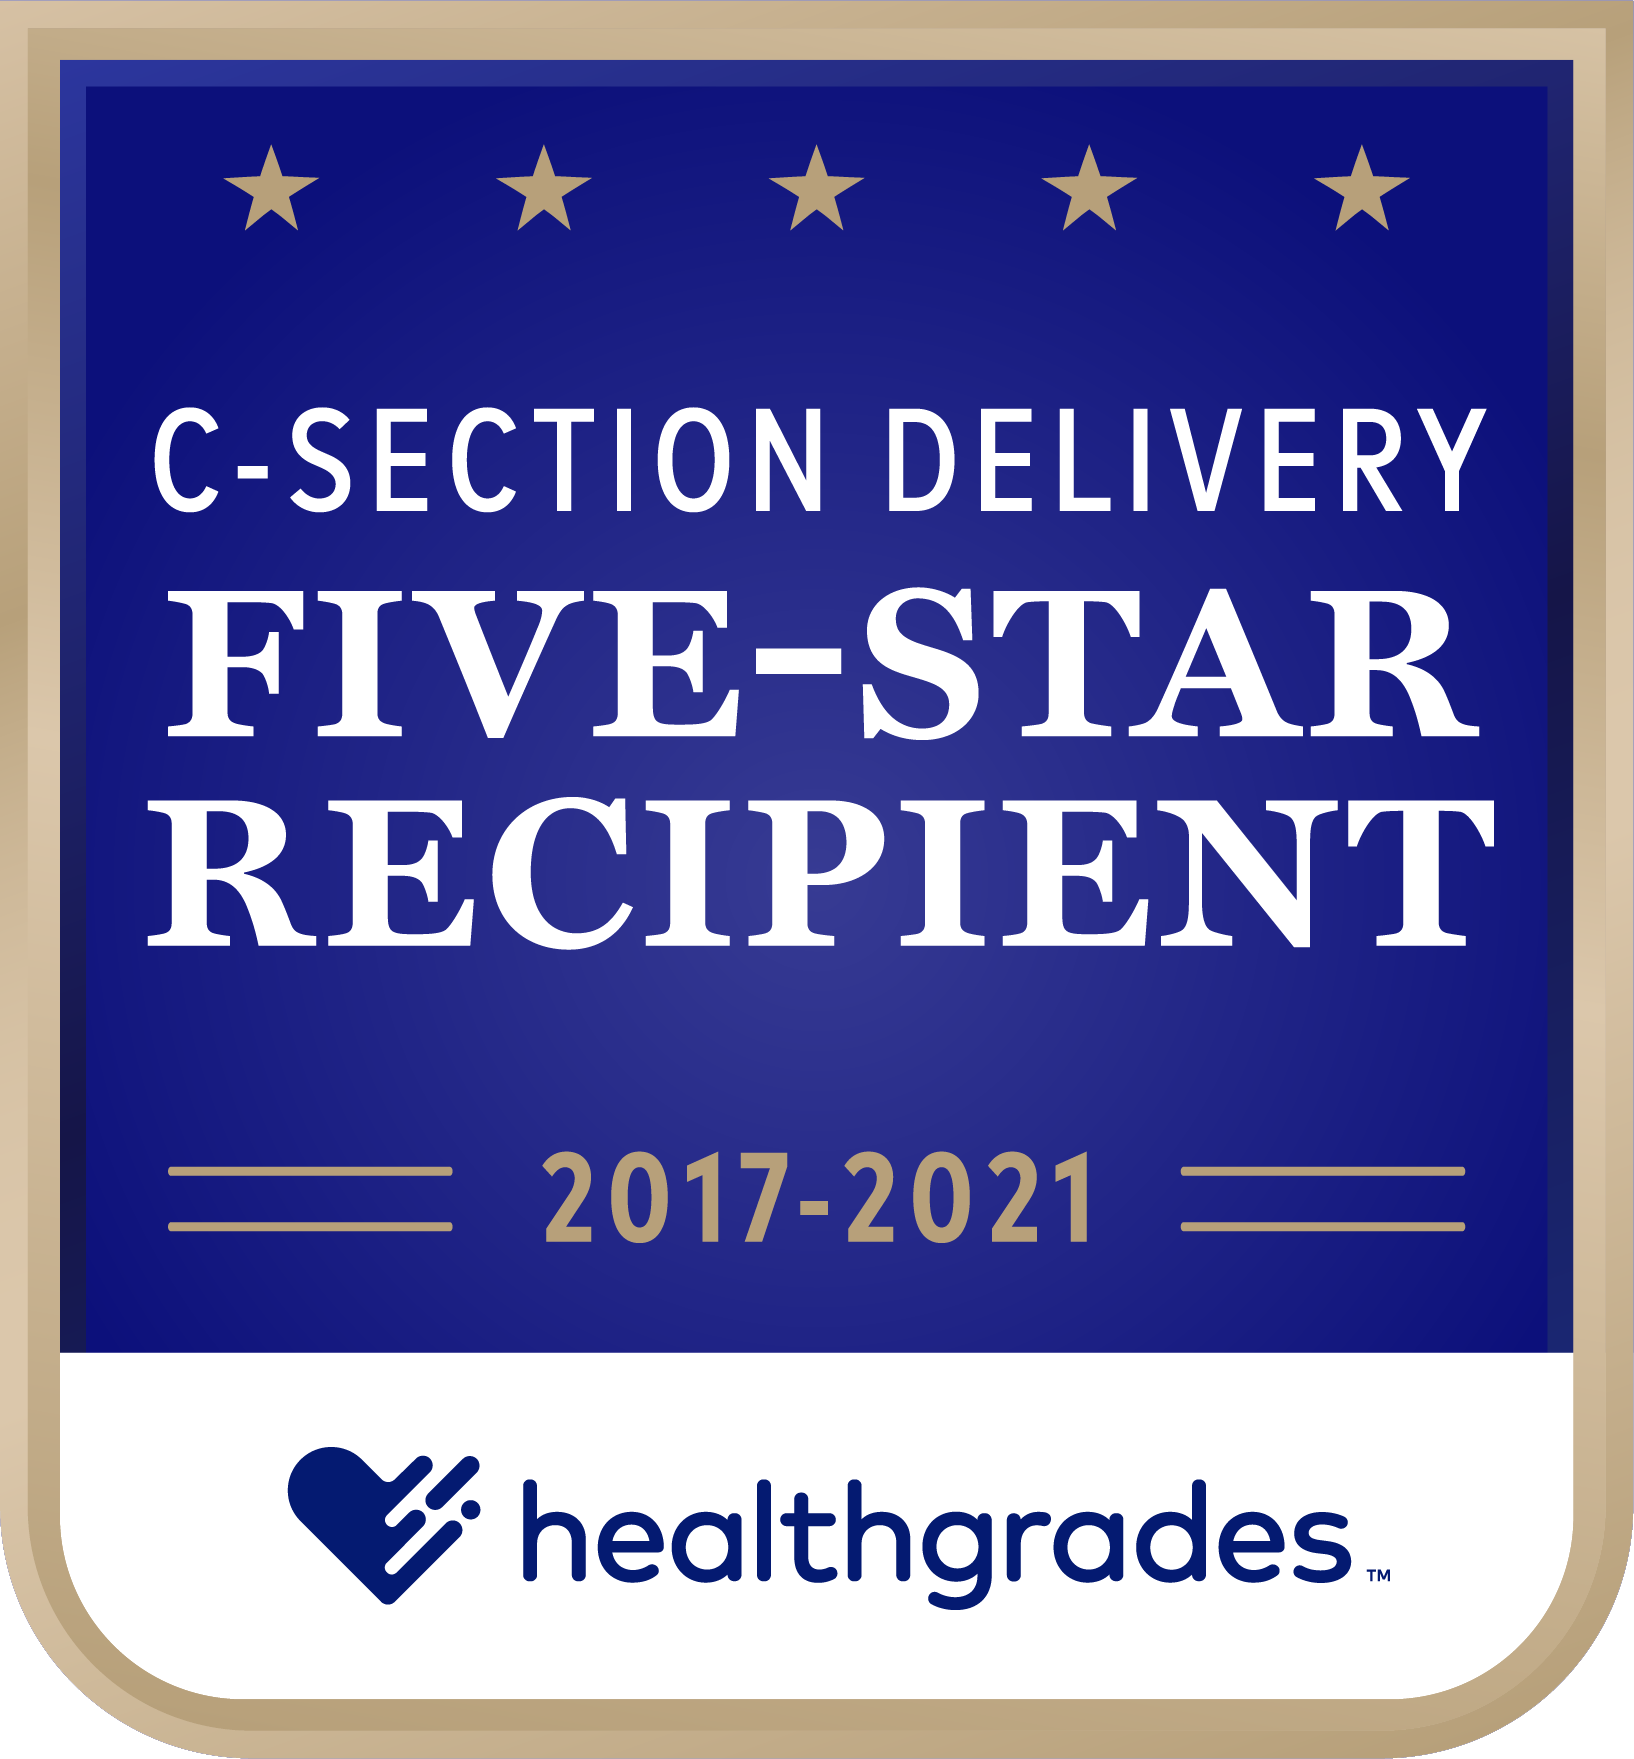 Five-Star Recipient for C-Section Delivery for 5 Years in a Row (2017-2021)